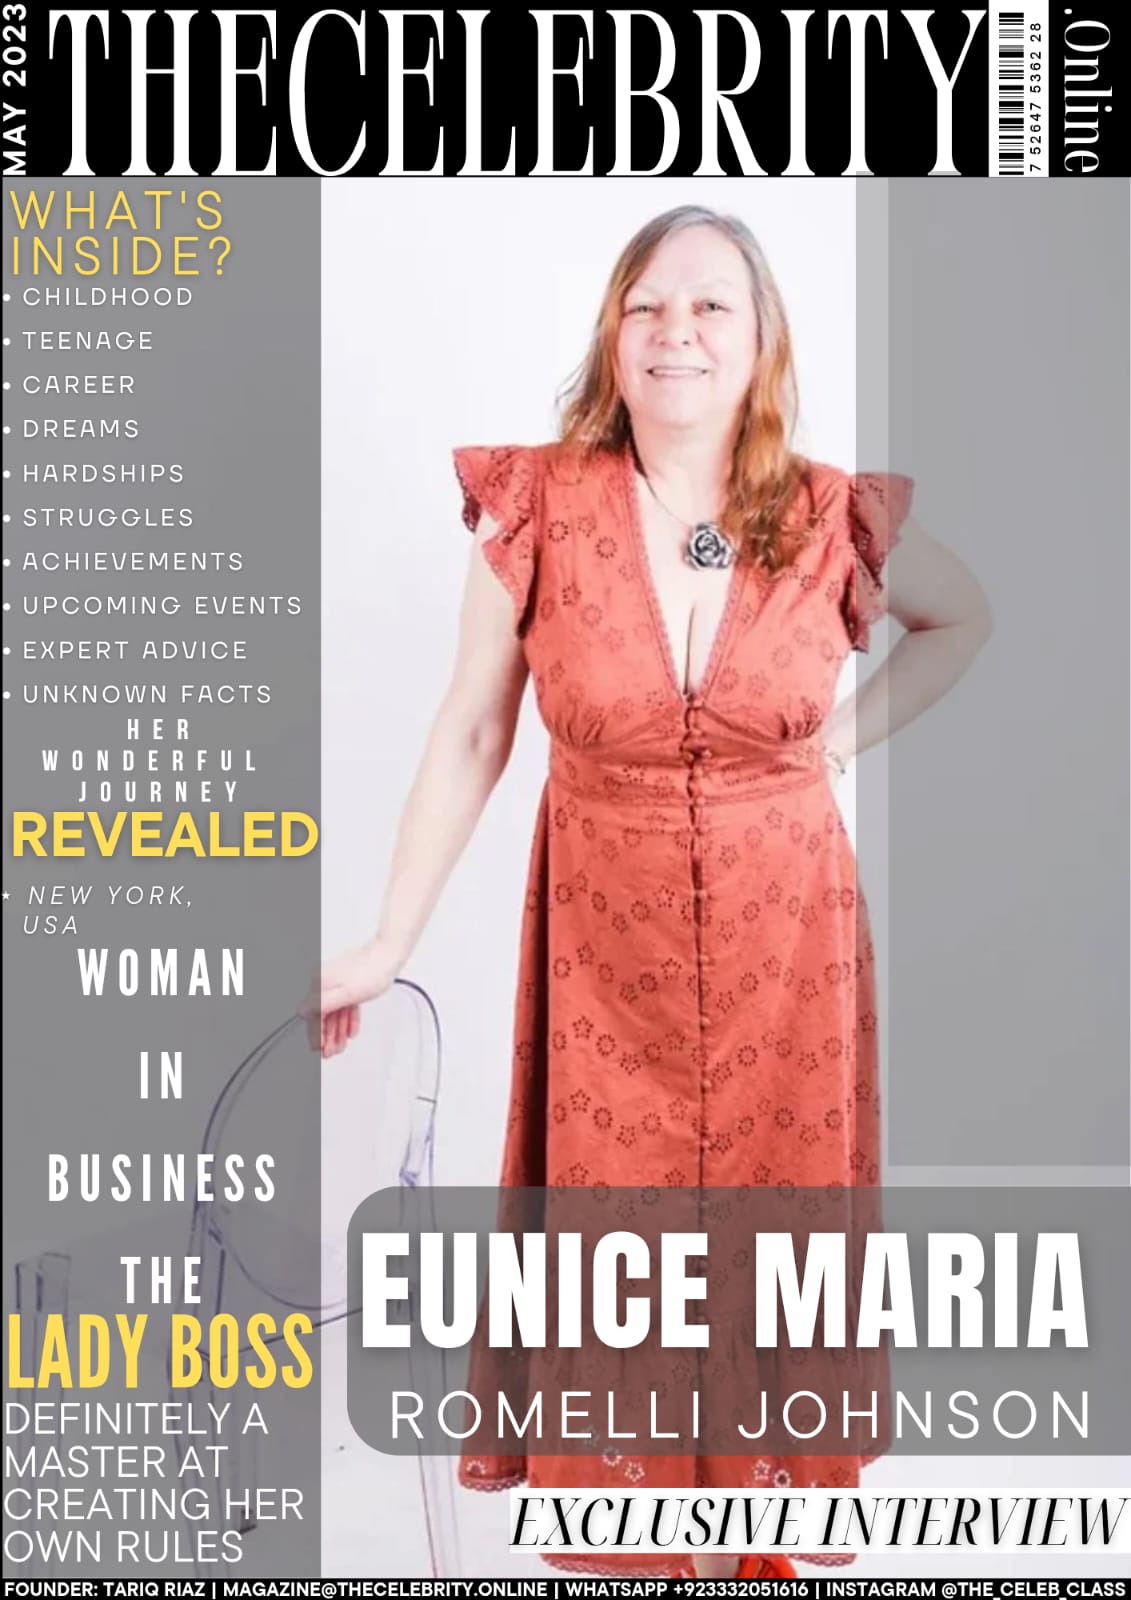 Eunice Maria Romelli Johnson – Exclusive Interview – ‘Always Give Value To Others In Your Life’